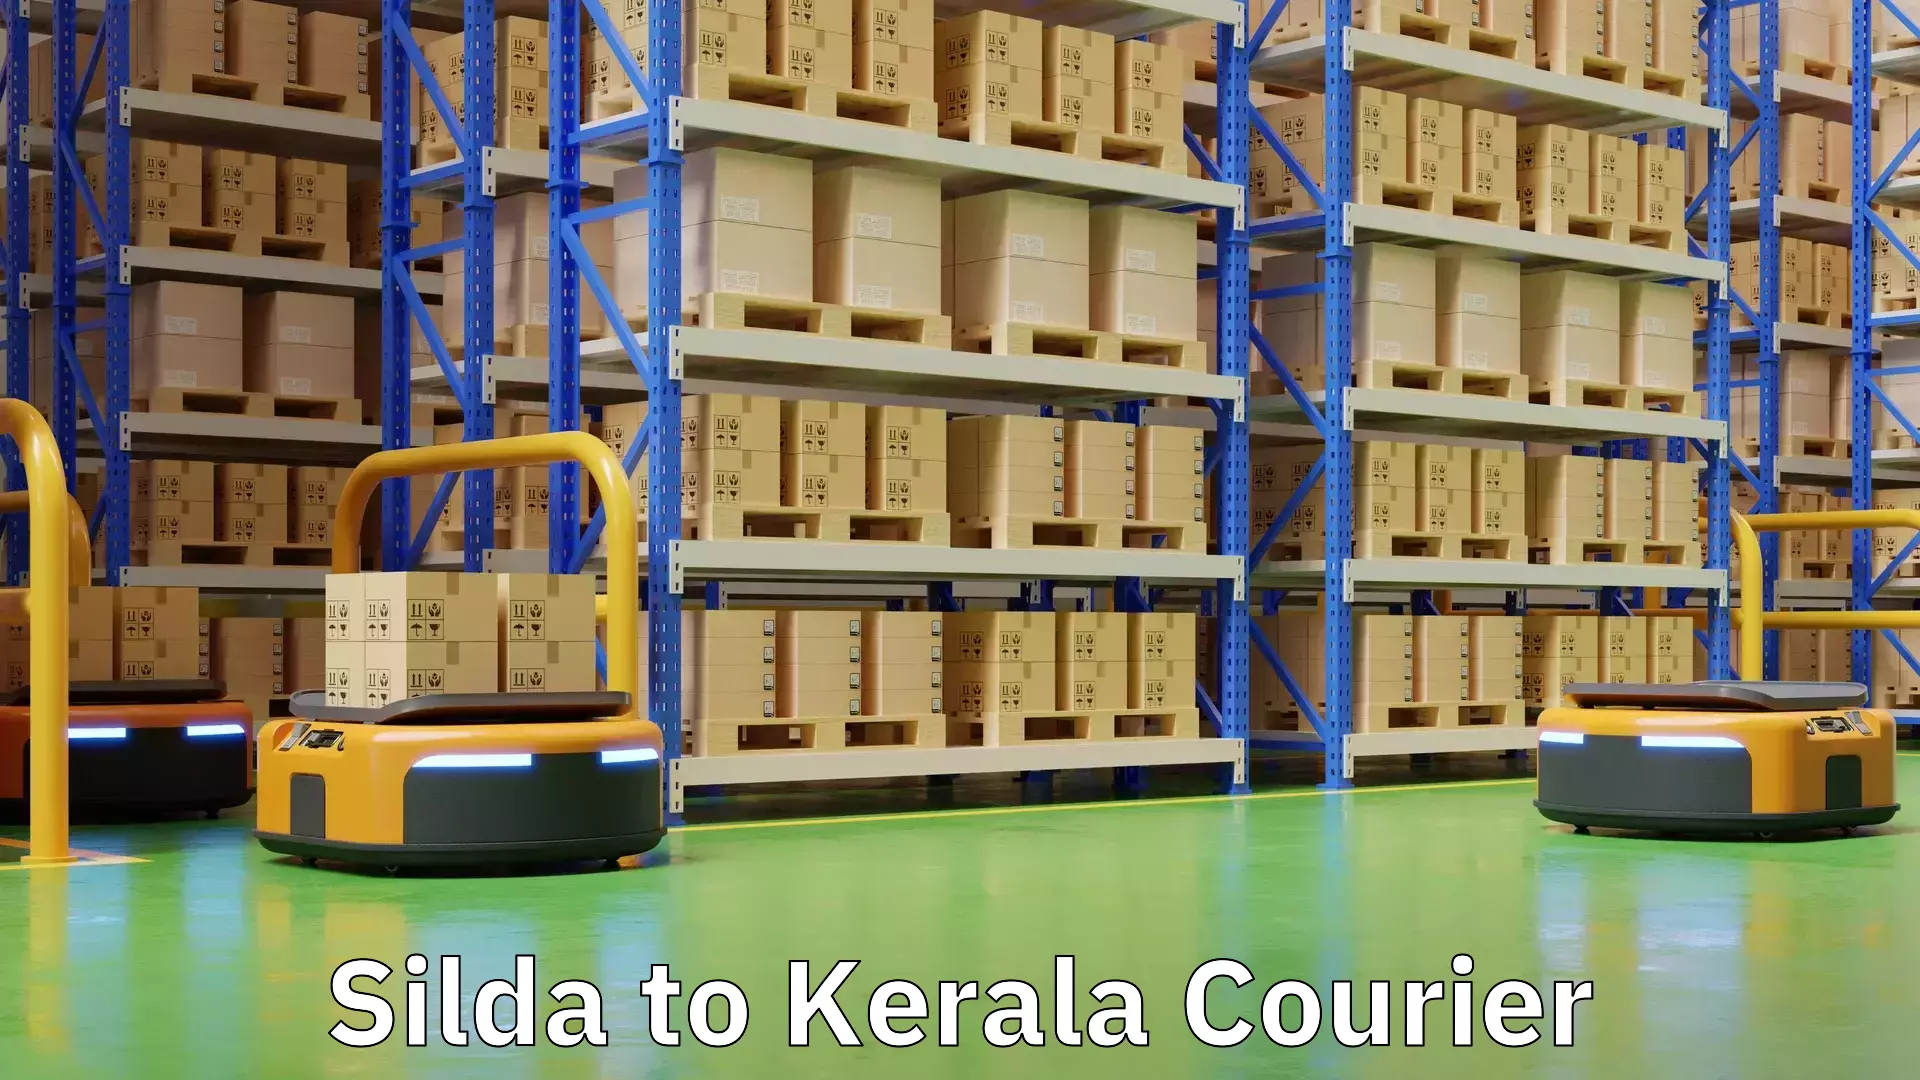 24-hour courier service Silda to Kerala